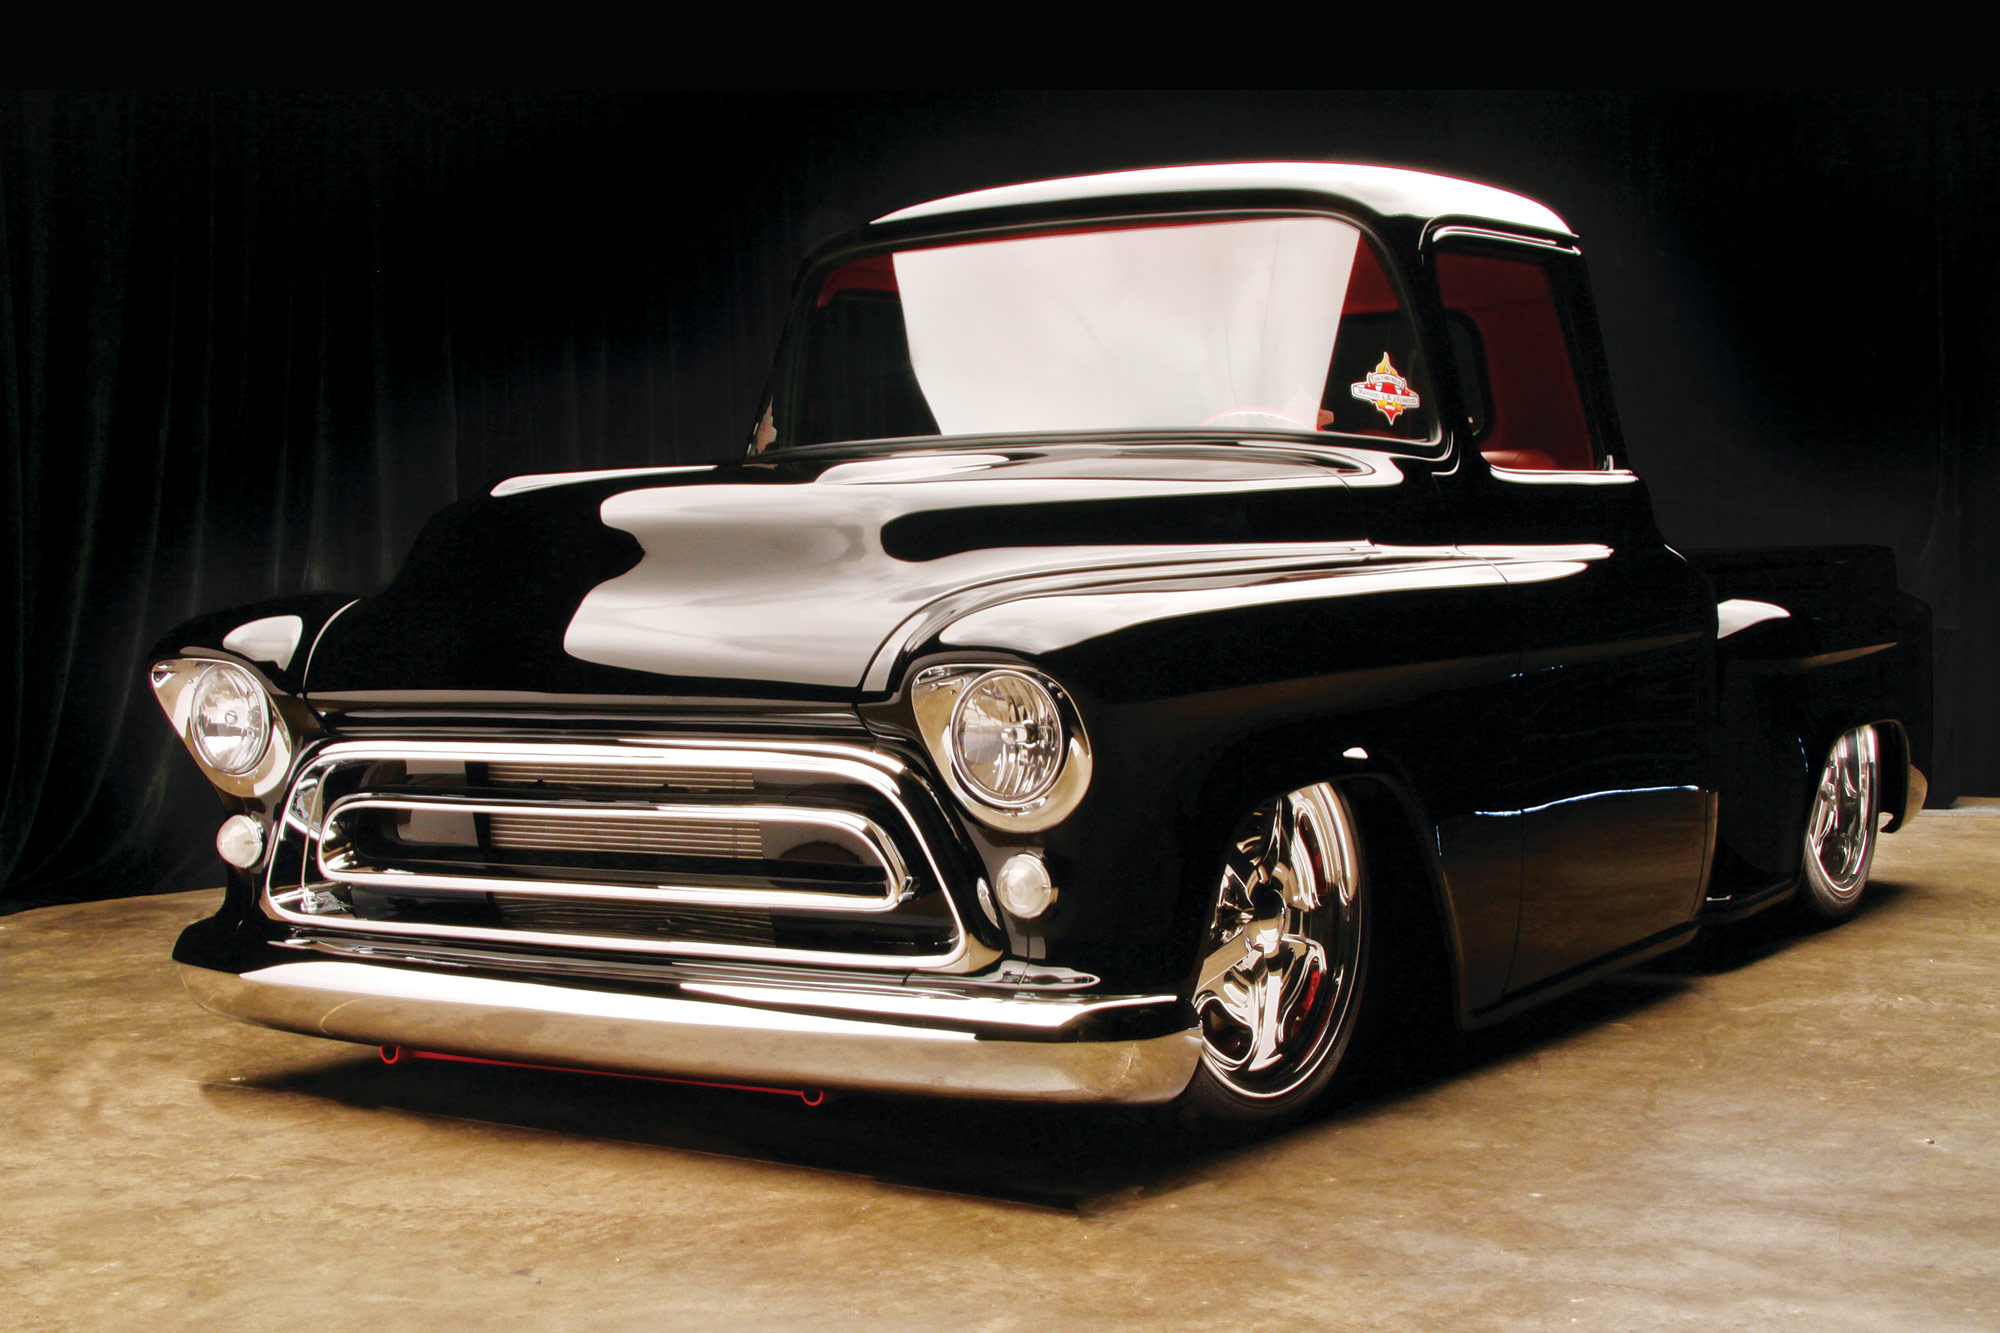 2000x1333 37+] Old Chevy Truck Wallpapers